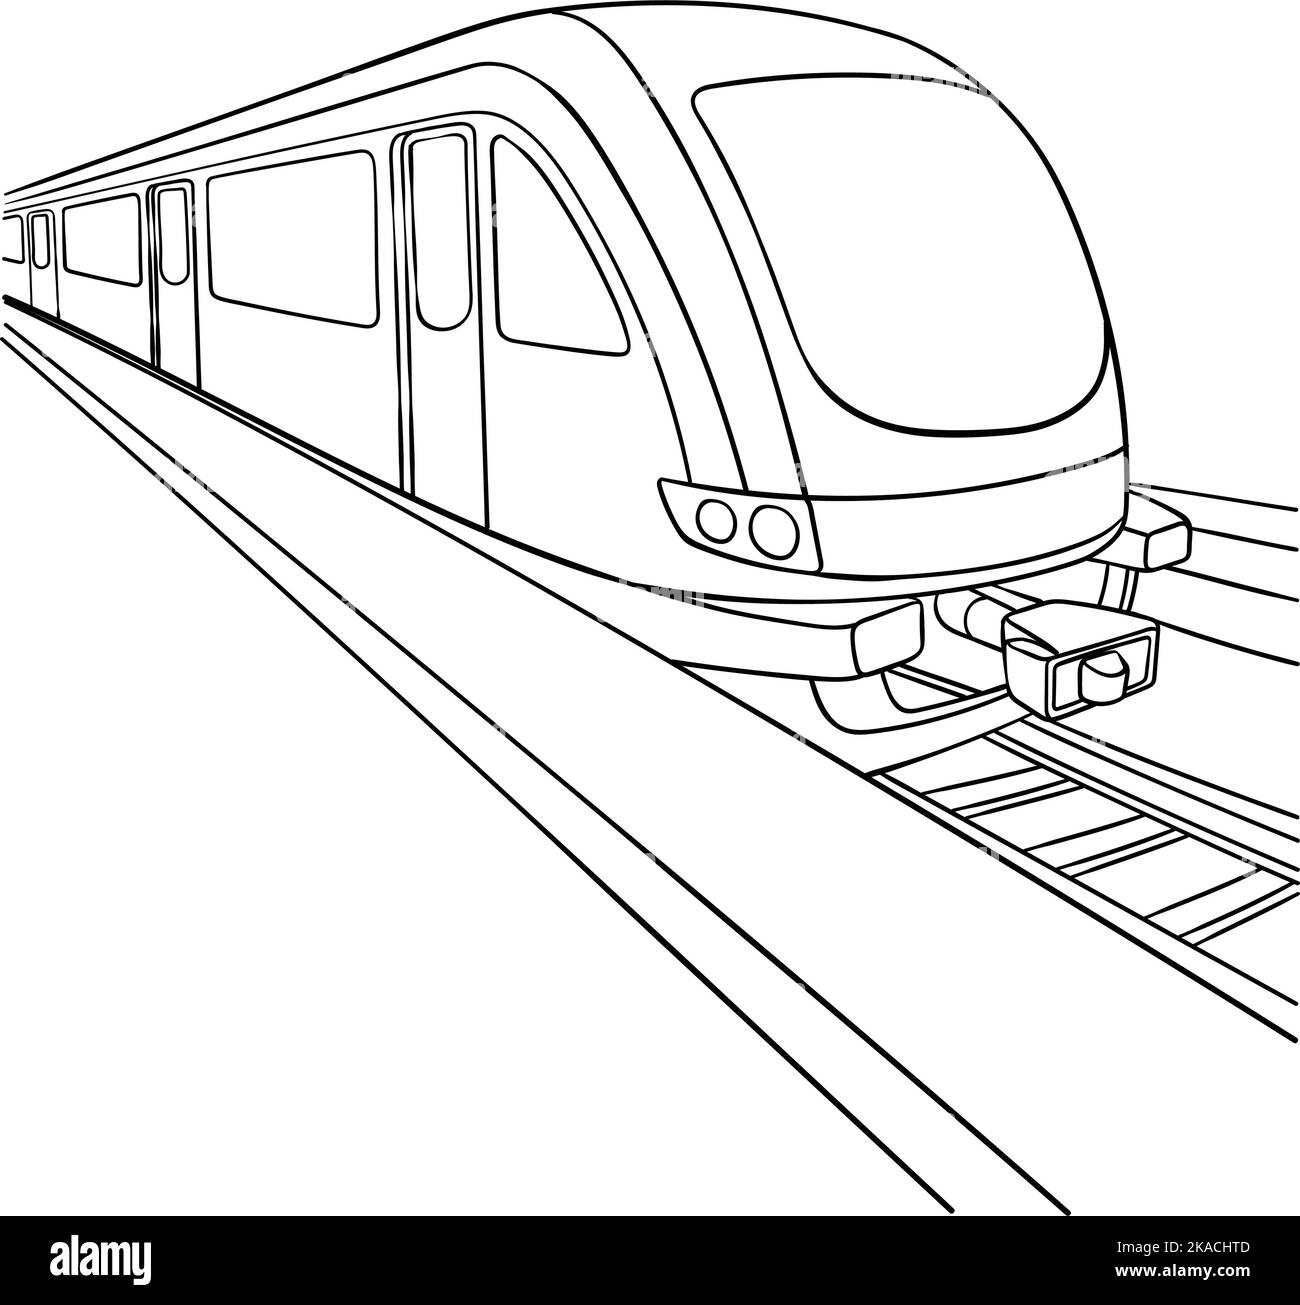 Train Sketch Metro Vector Images over 240